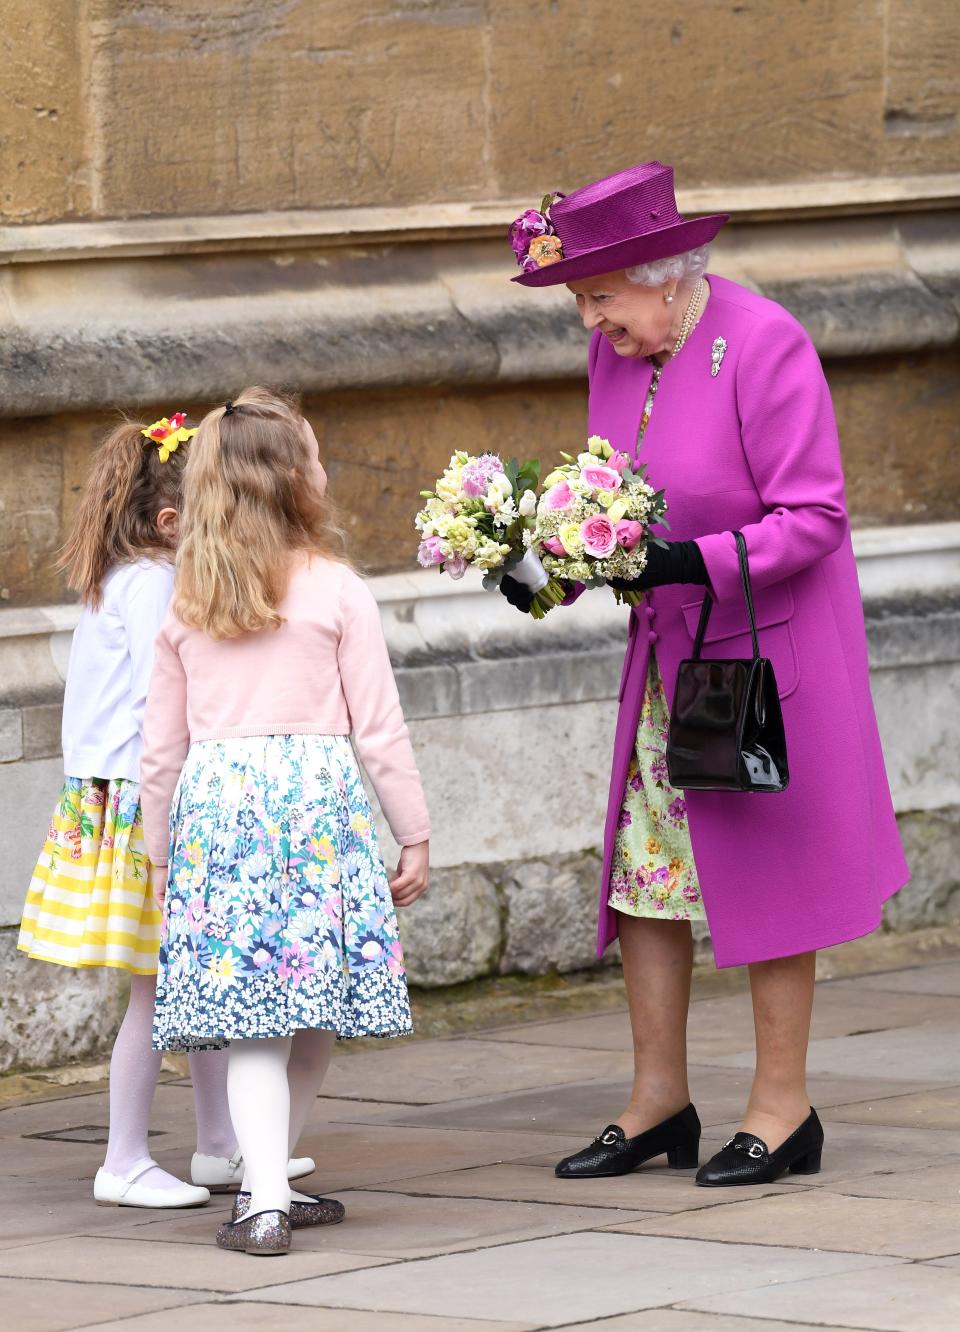 Queen Elizabeth II departs after attending an Easter Service at St George's Chapel on April 1, 2018